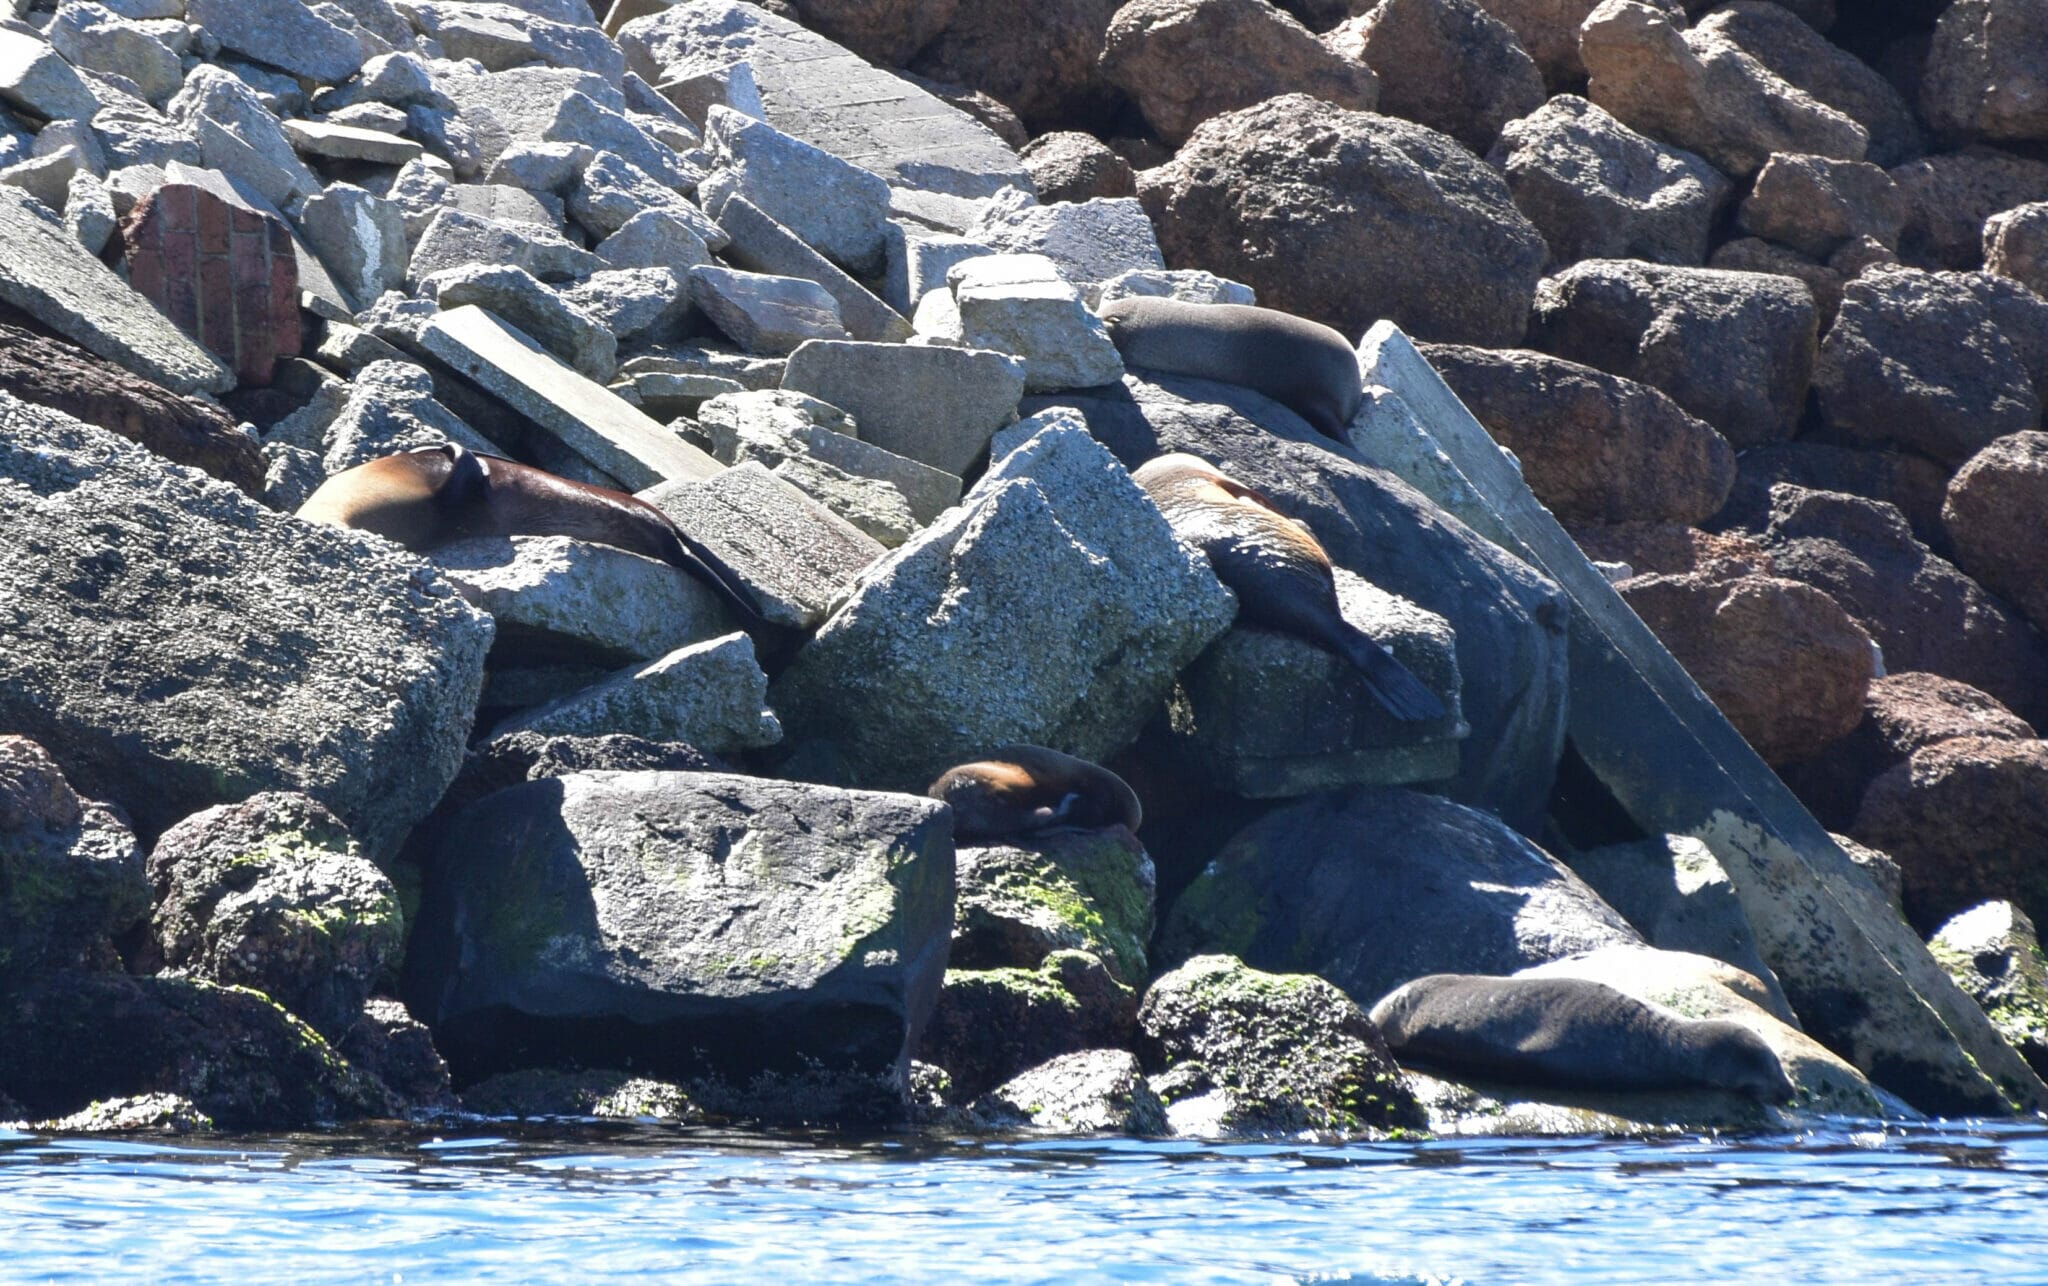 Seals sunning on rocks in King George Sound, Albany